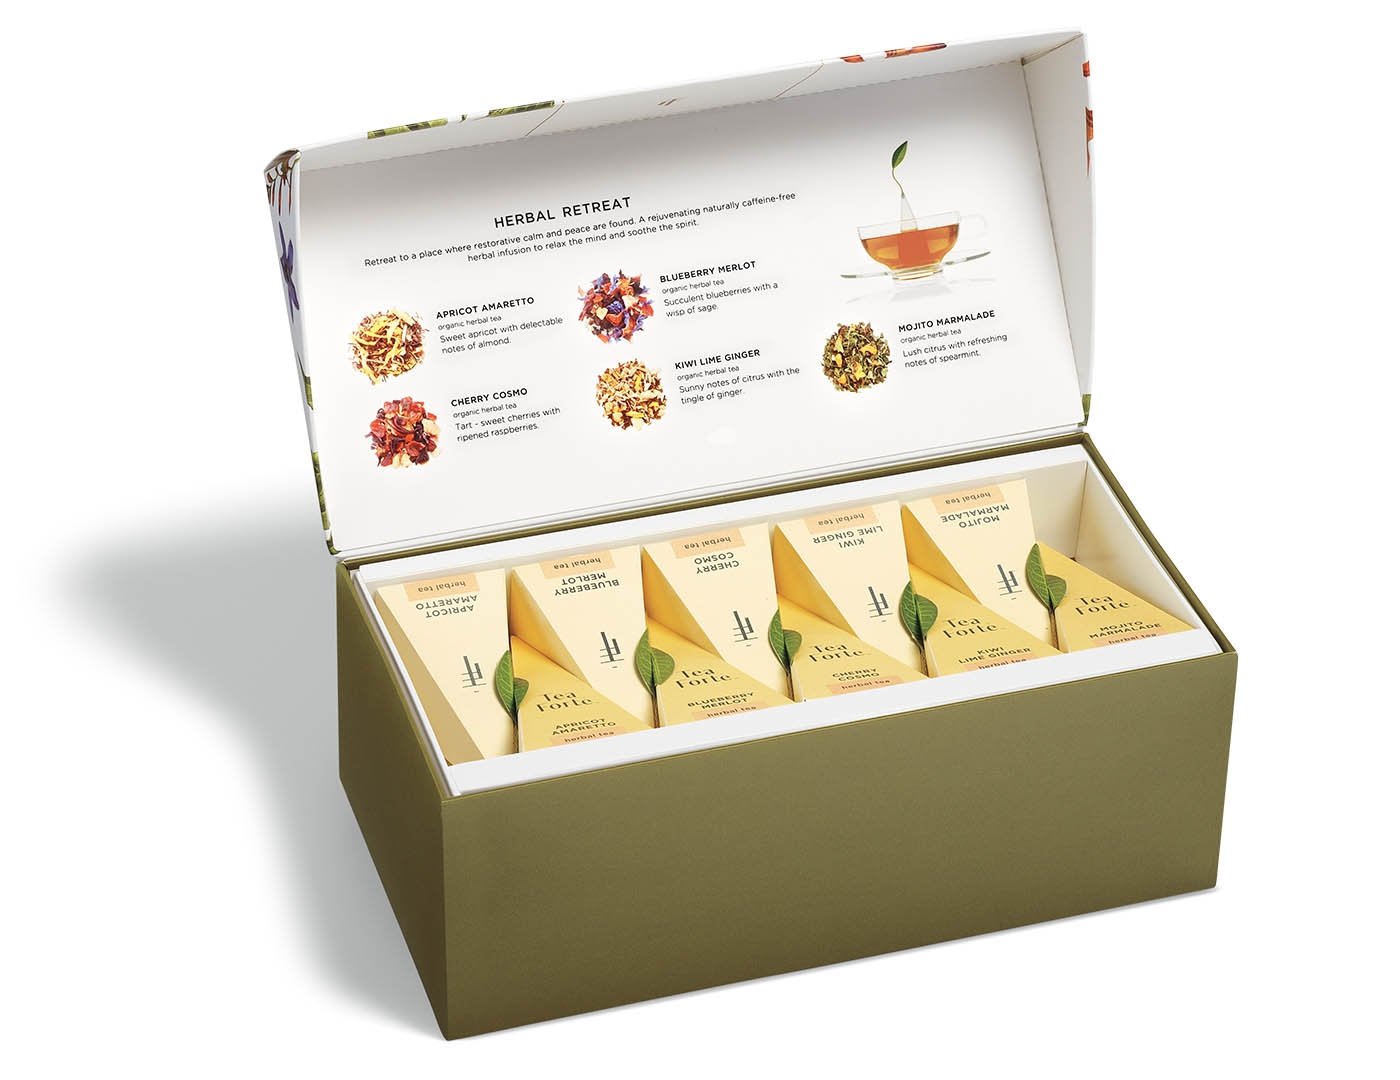 Herbal Retreat tea assortment in a 20 count presentation box with lid open